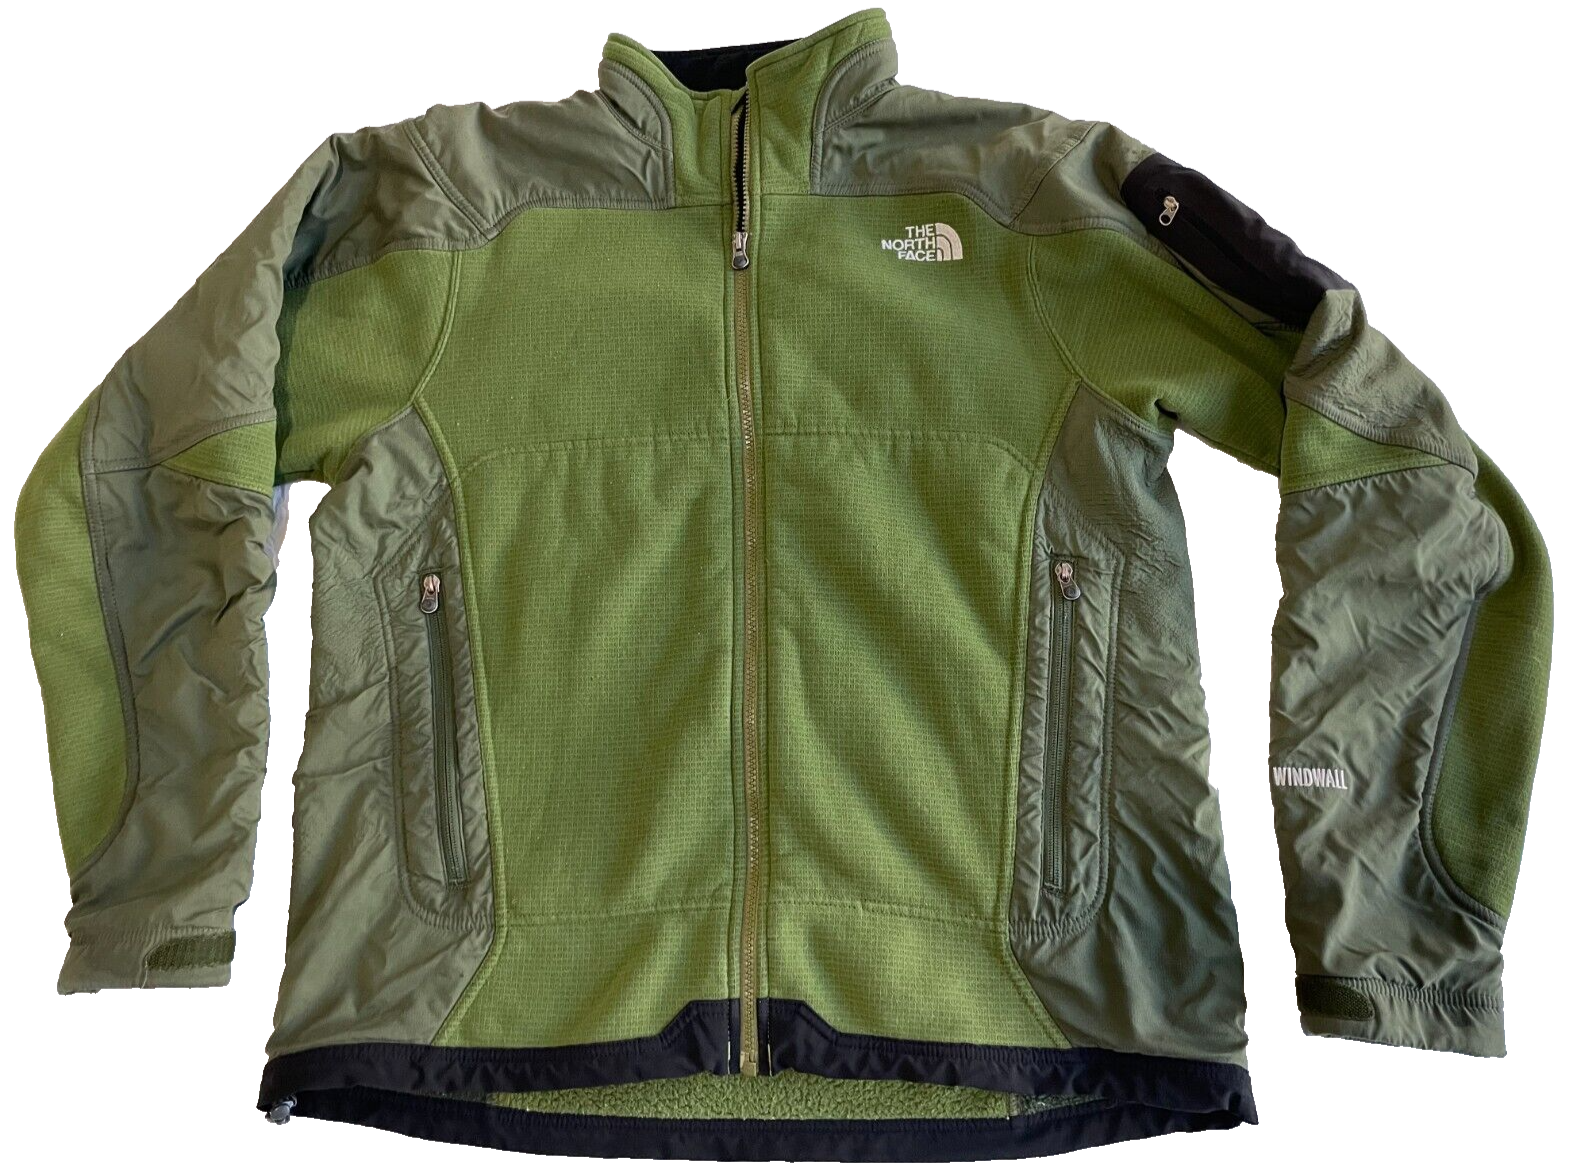 The North Face Windwall Jacket Men's Size Large Full Zip Green - $62.99